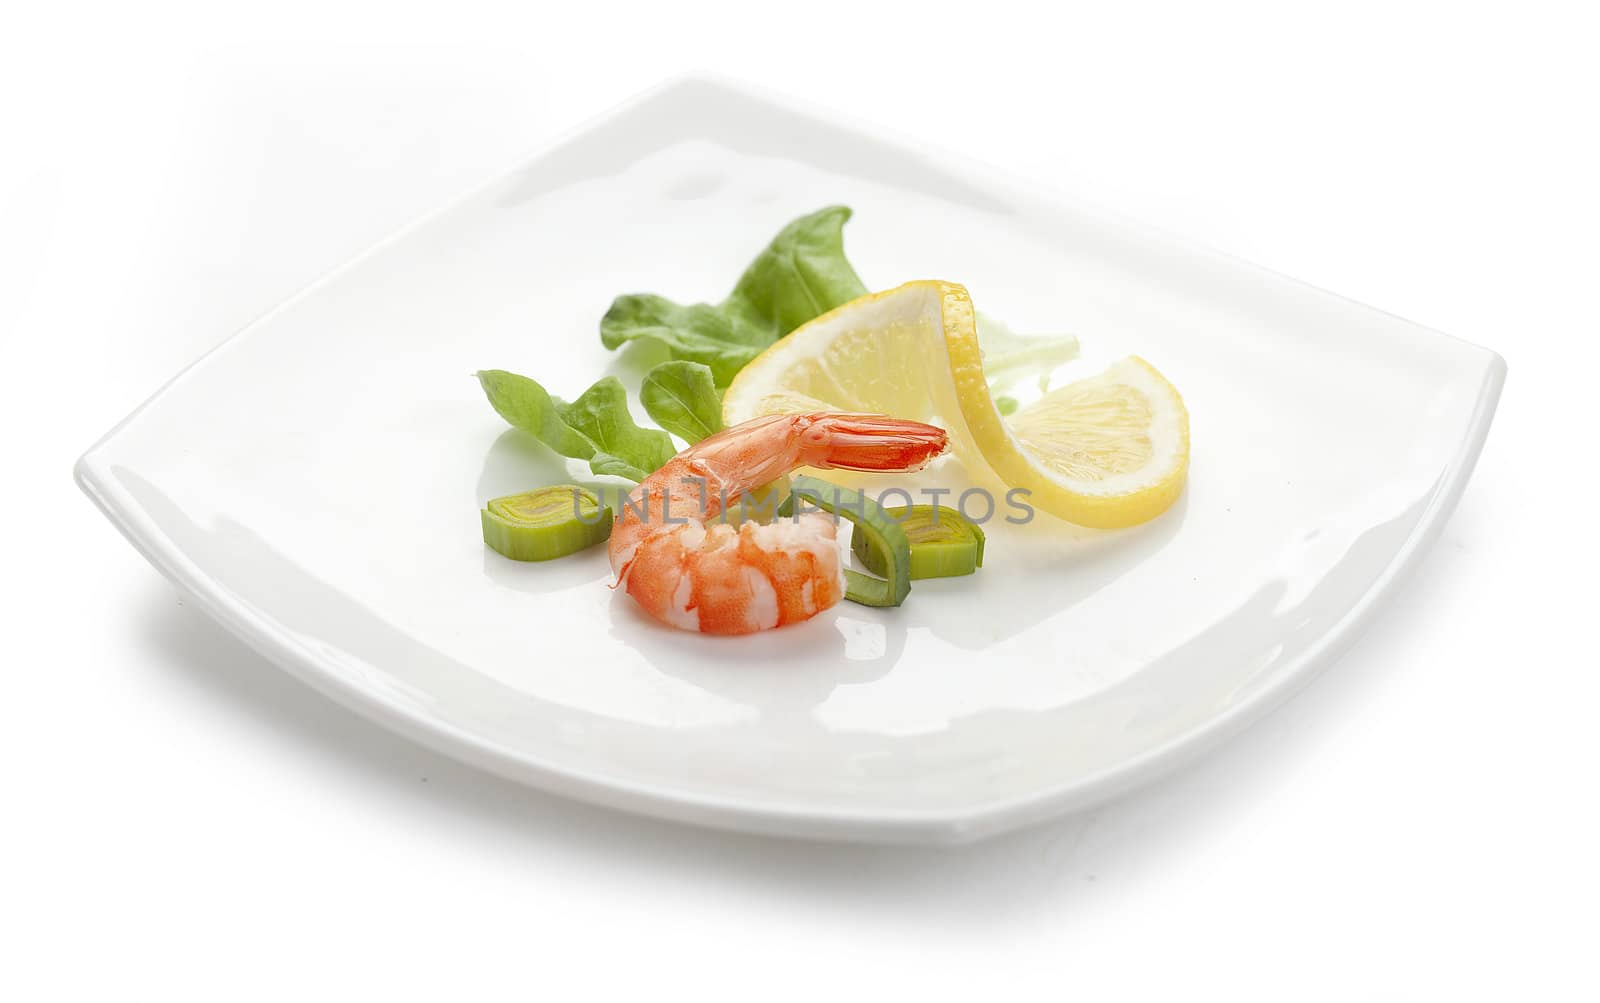 One shrimp's tail with fresh lettuce, leek and lemon on the white plate